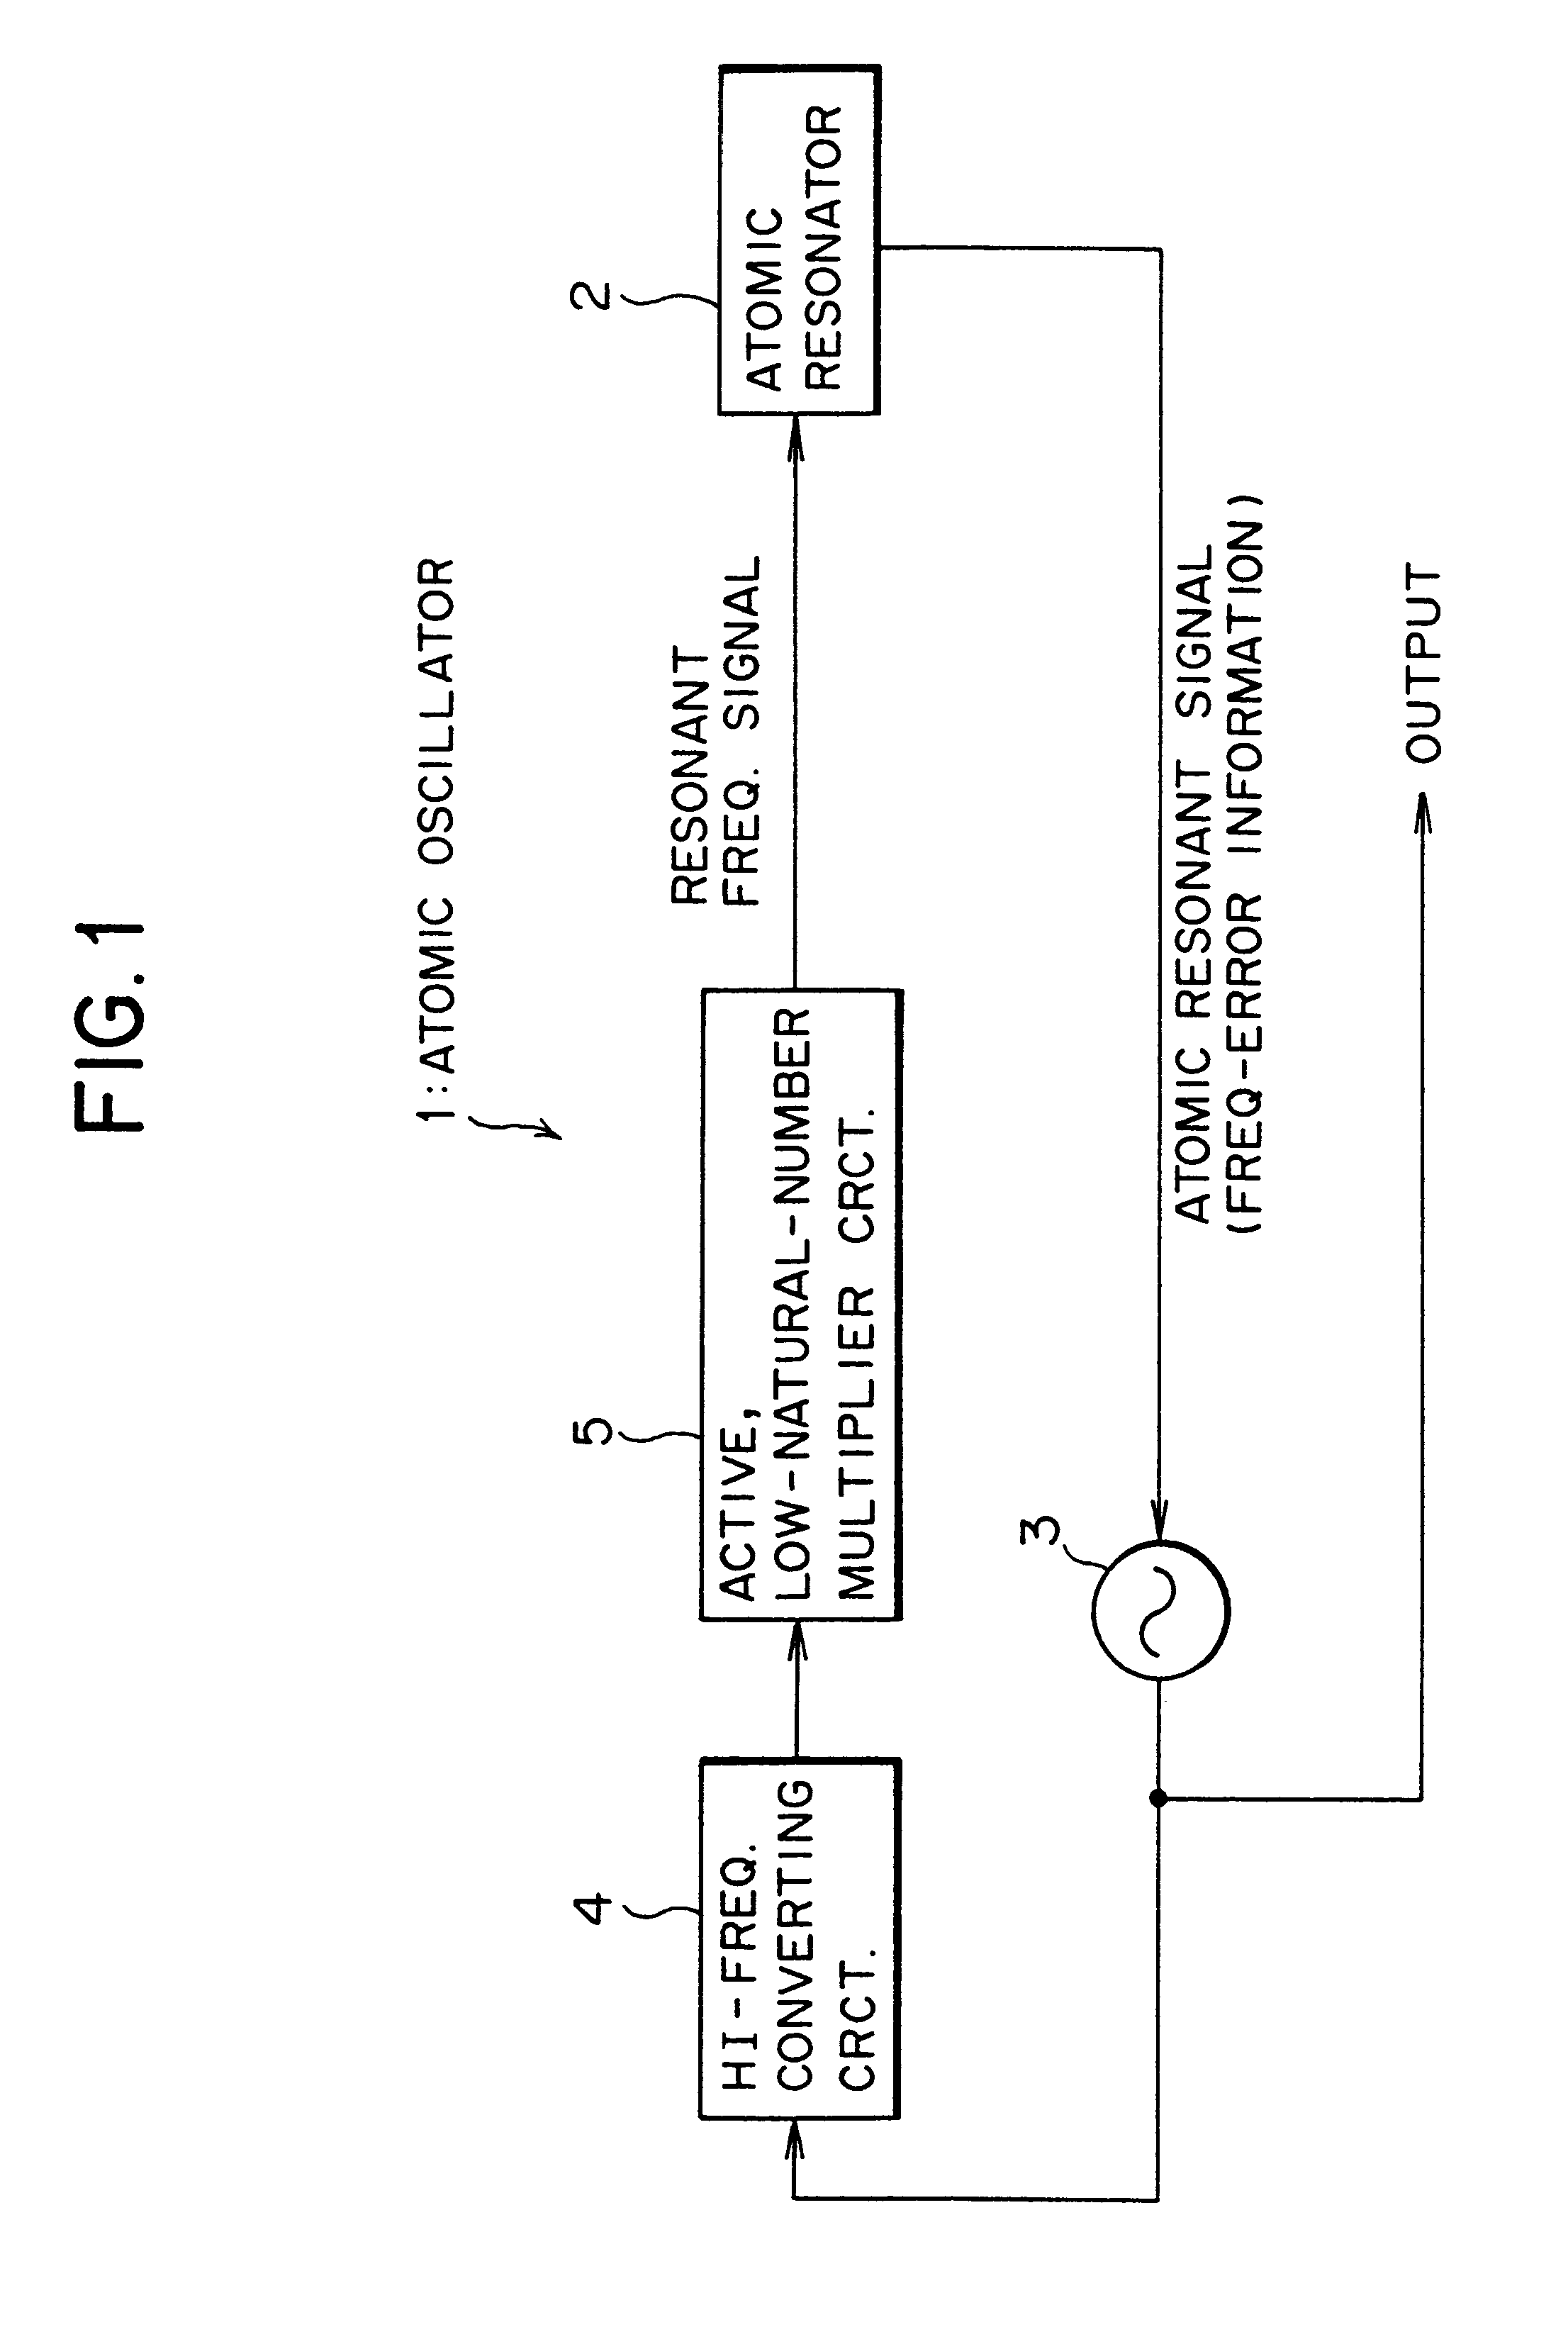 Atomic oscillator utilizing a high frequency converting circuit and an active, low-integral-number multiplier